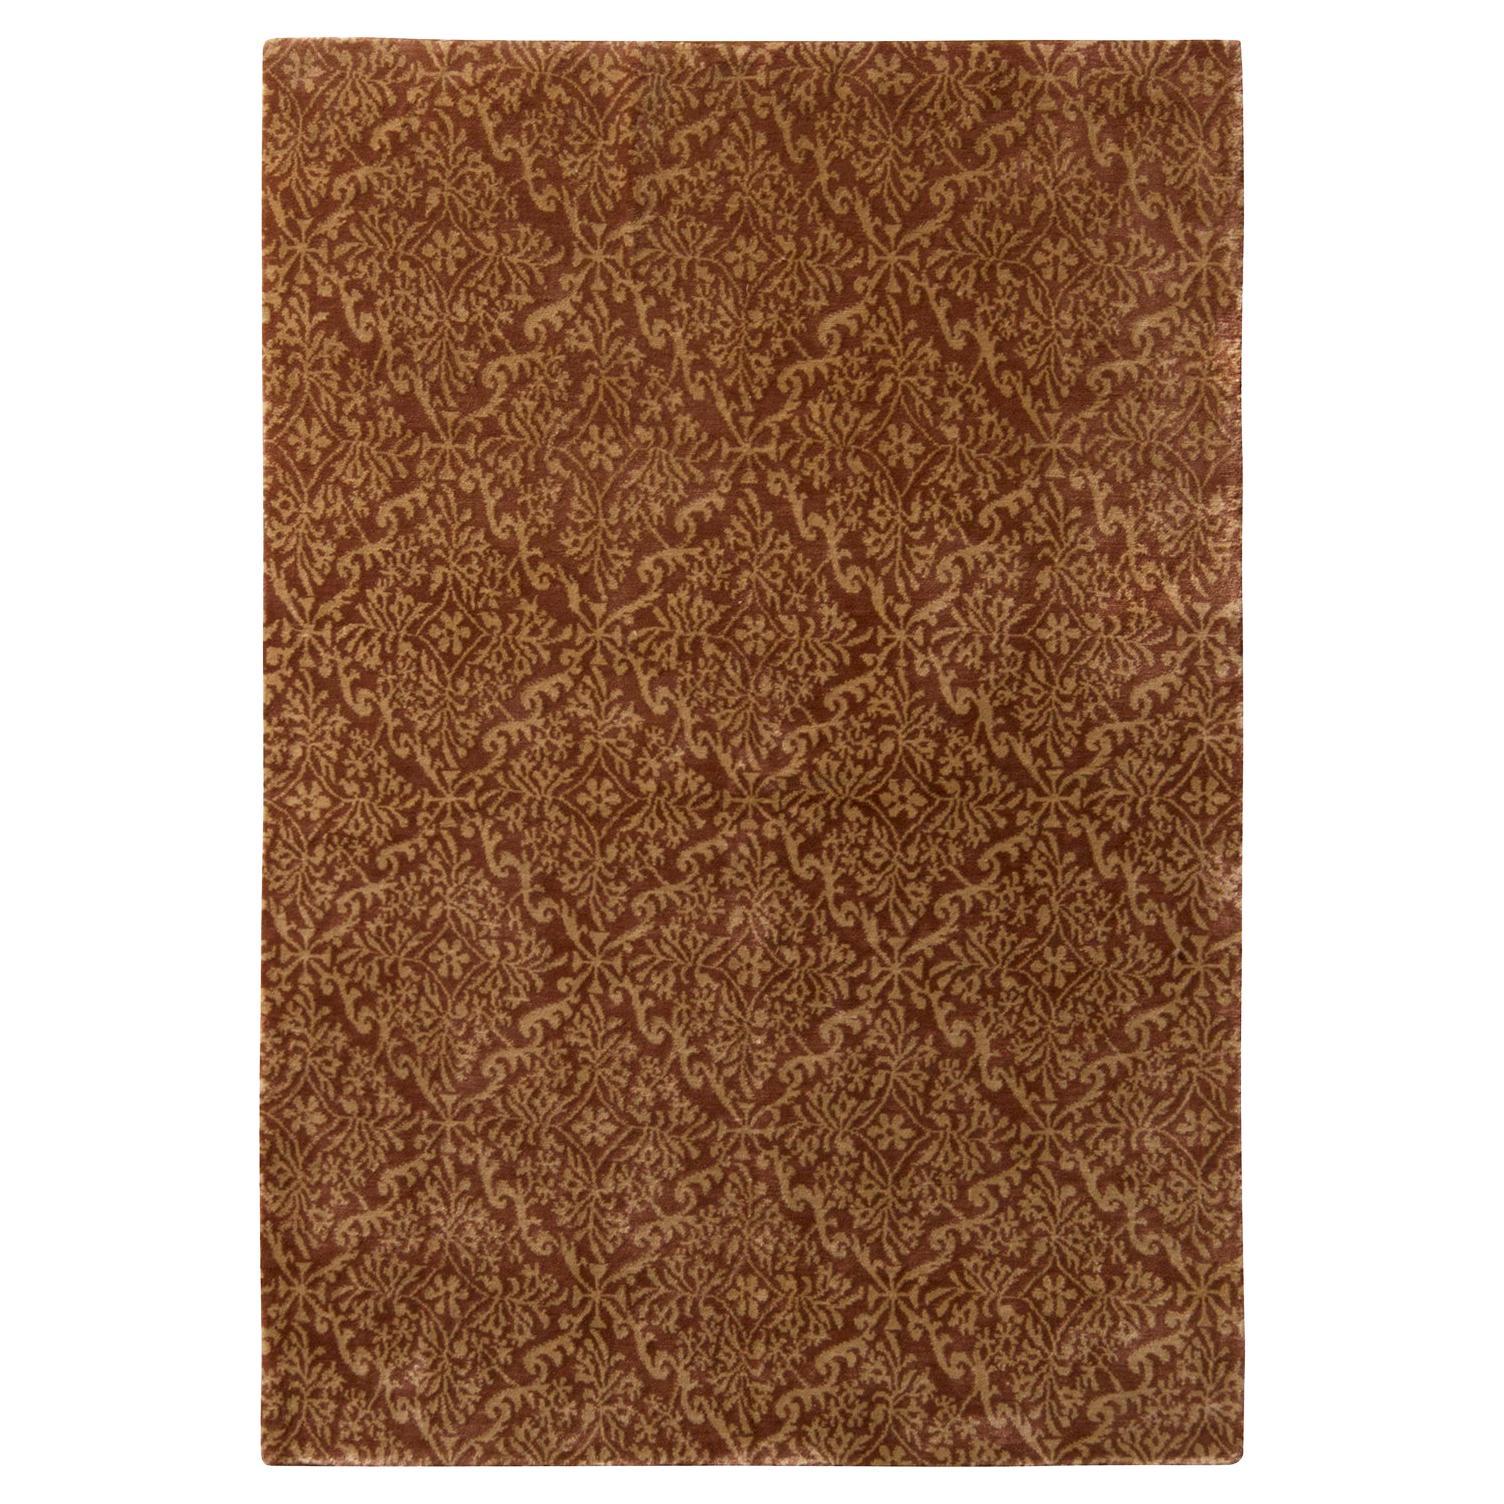 Rug & Kilim's Classic European Style Rug in All over Brown, Gold Floral Pattern For Sale